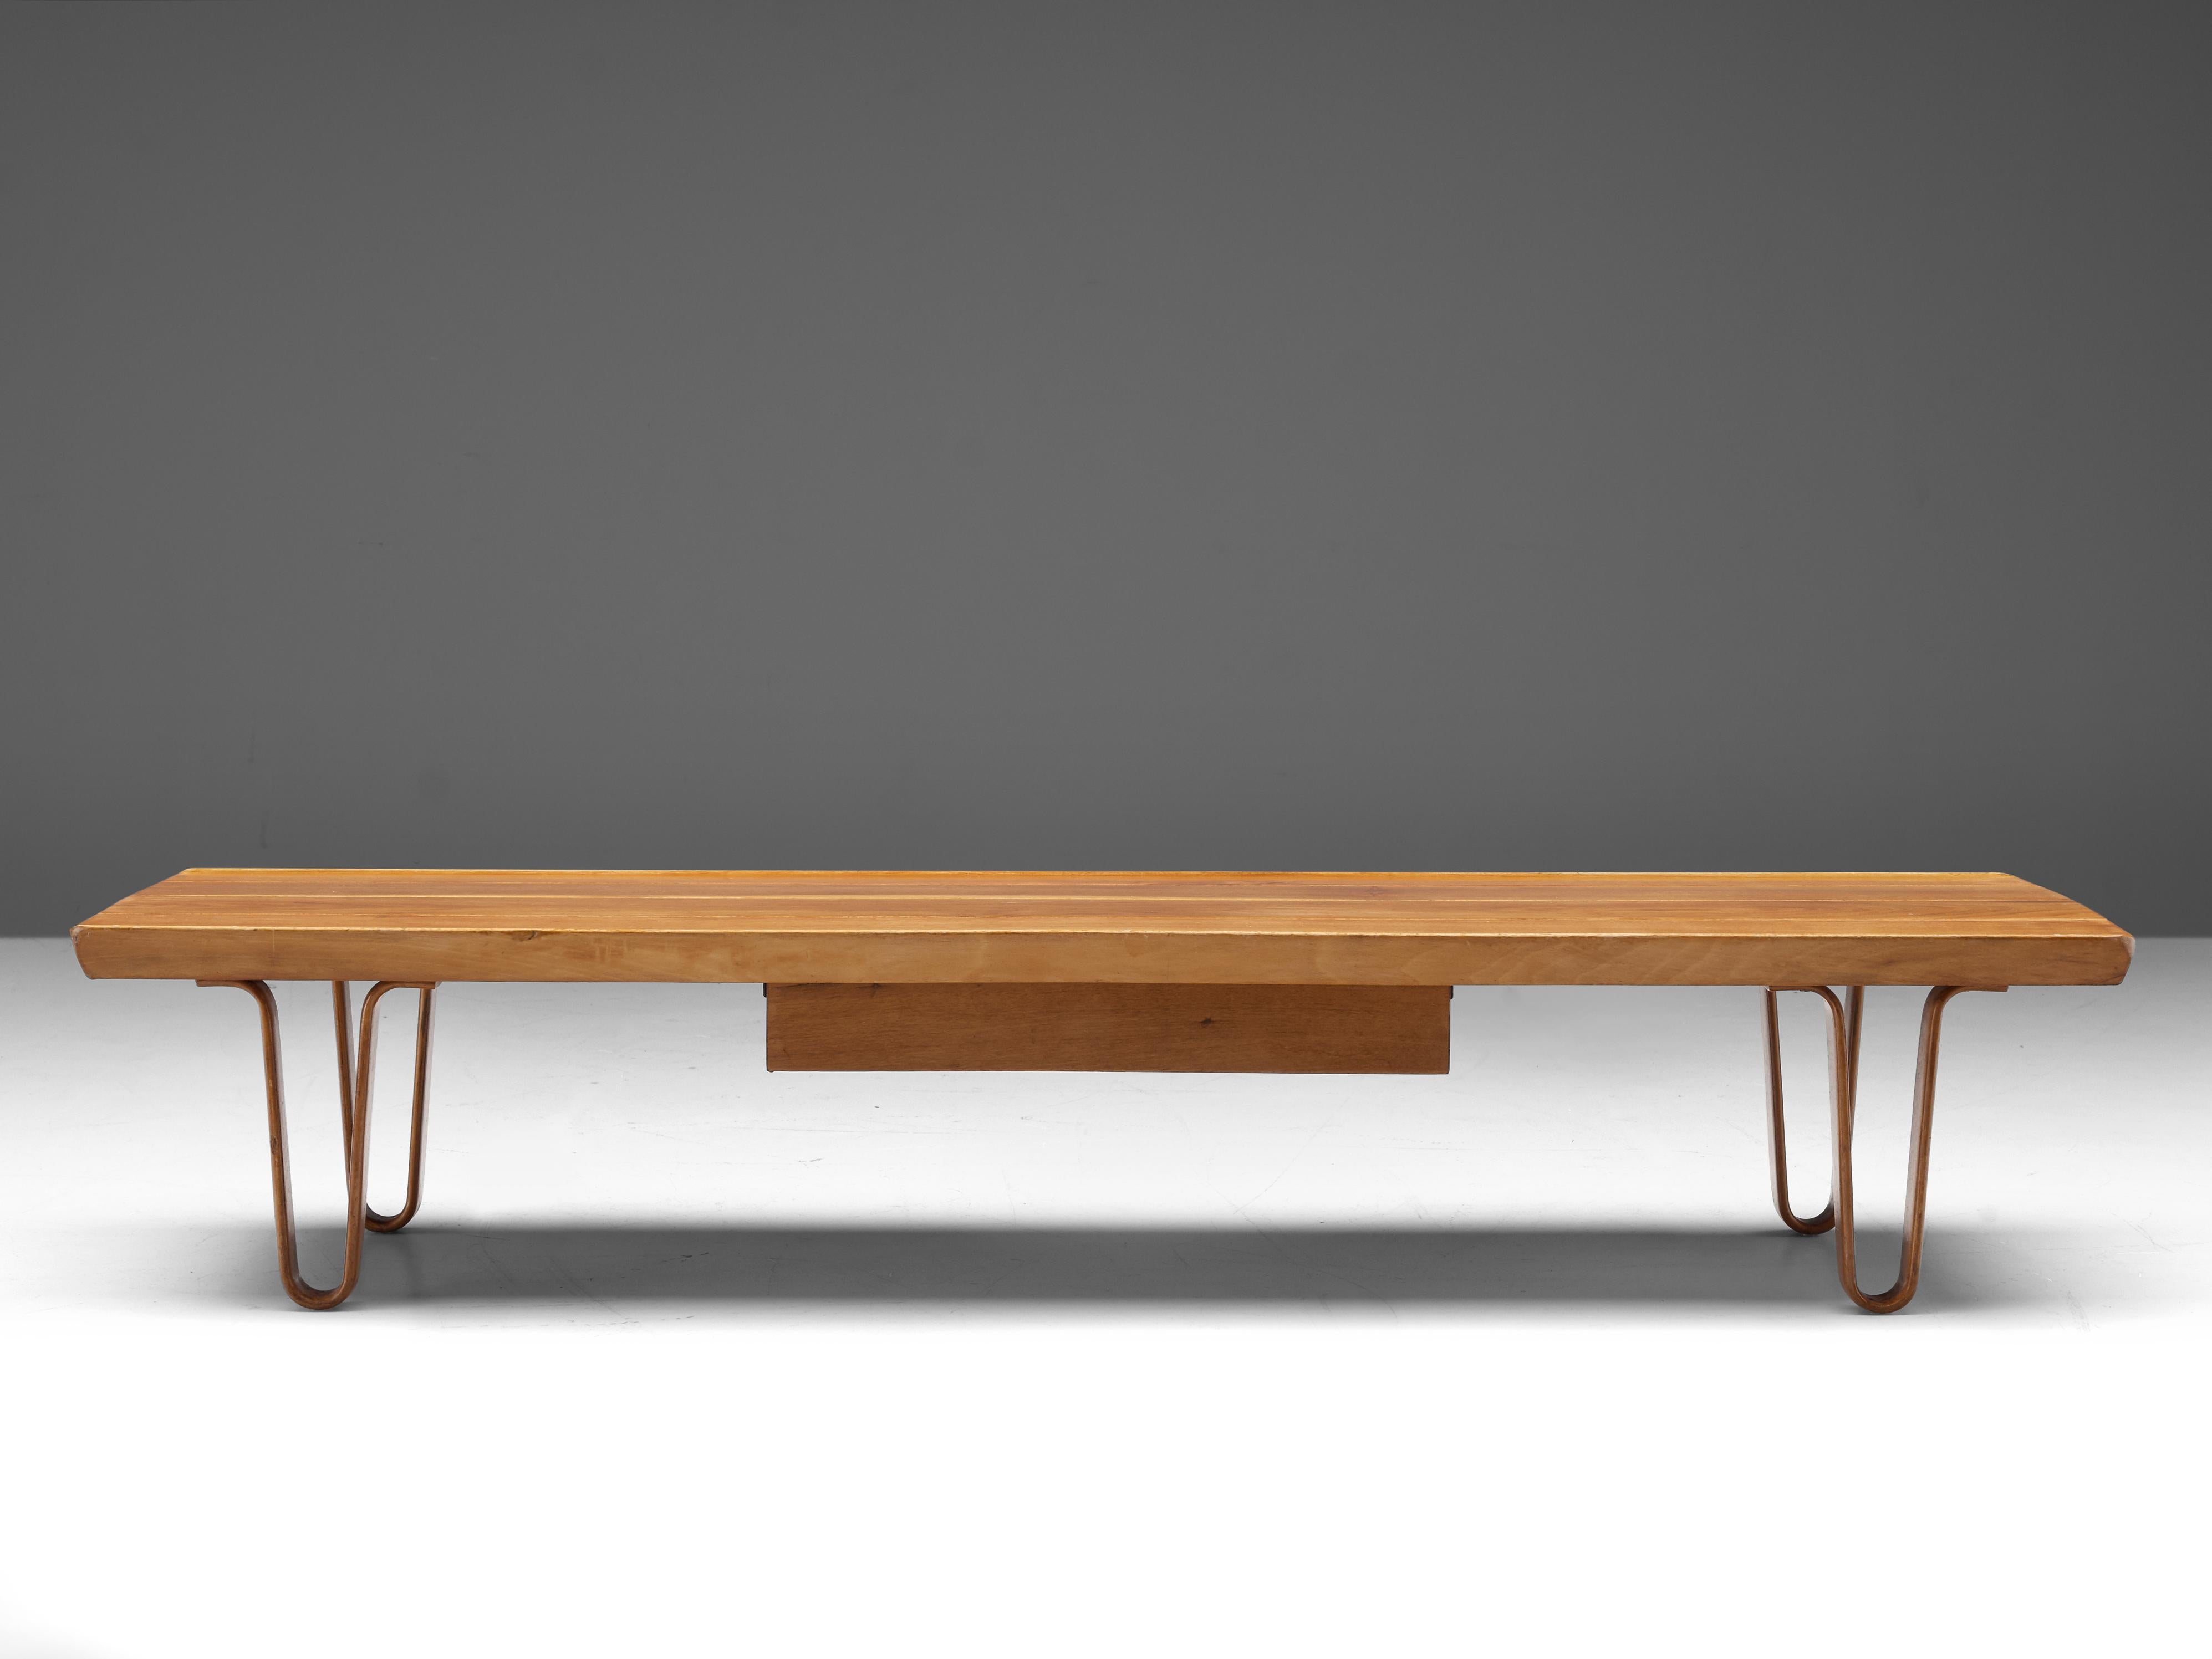 Edward Wormley, 'Long John' coffee table model 4699, mahogany, United States, 1946.

The 'Long John' coffee table is a design of Edward Wormley for Dunbar and features beautiful lines, balanced in an almost Japanese aesthetics. Dunbar mentions